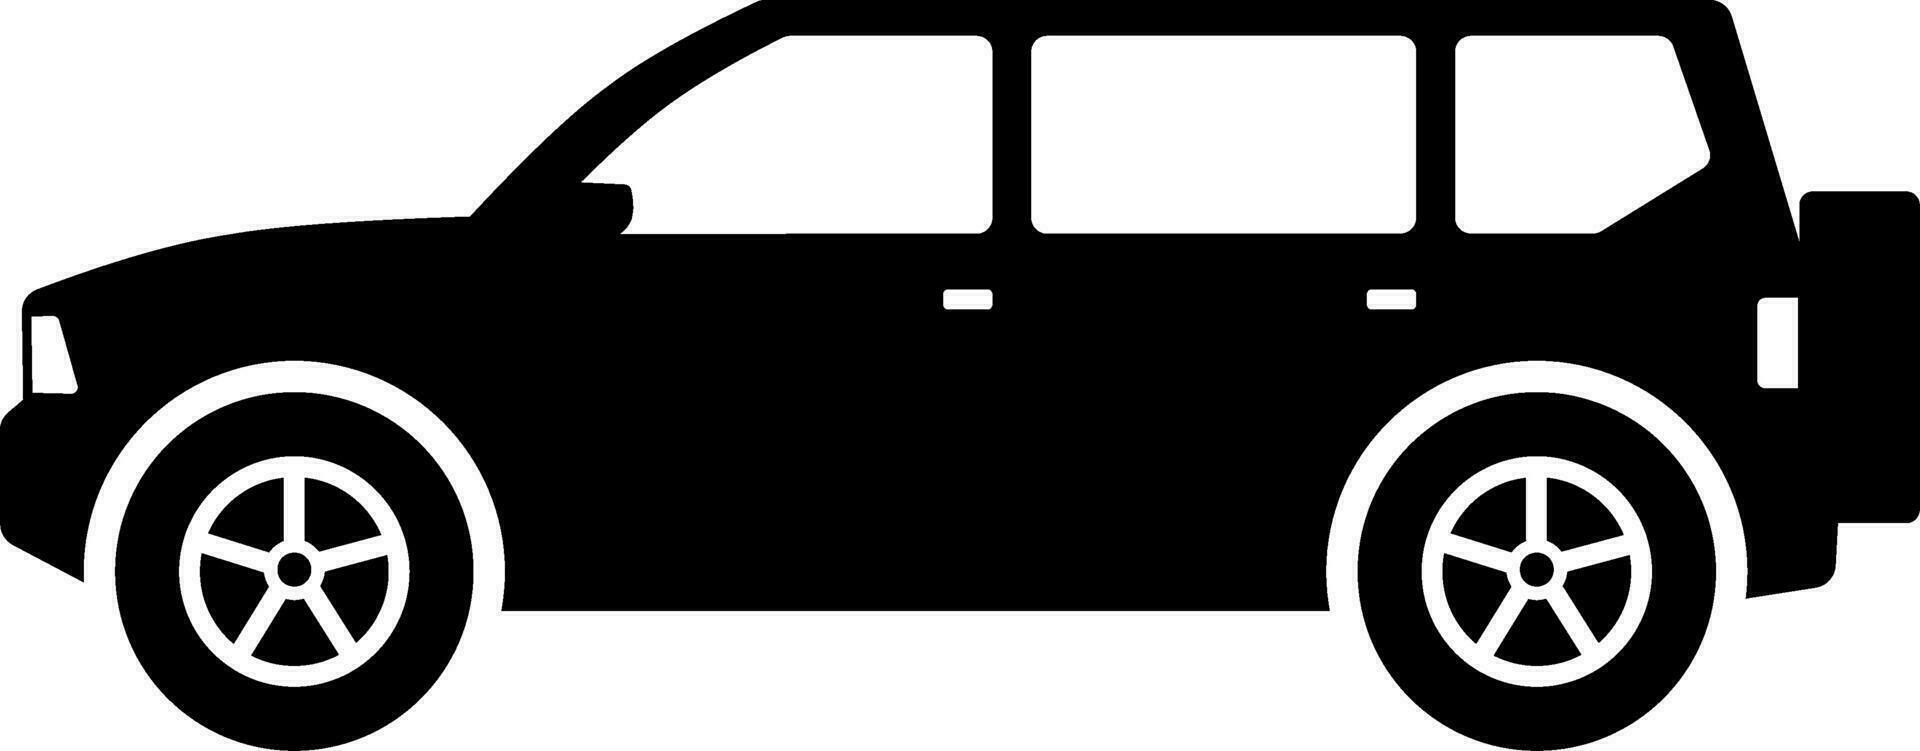 SUV car icon vector. Sport utility vehicle silhouette for icon, symbol or sign. SUV car graphic resource for transportation or automotive vector